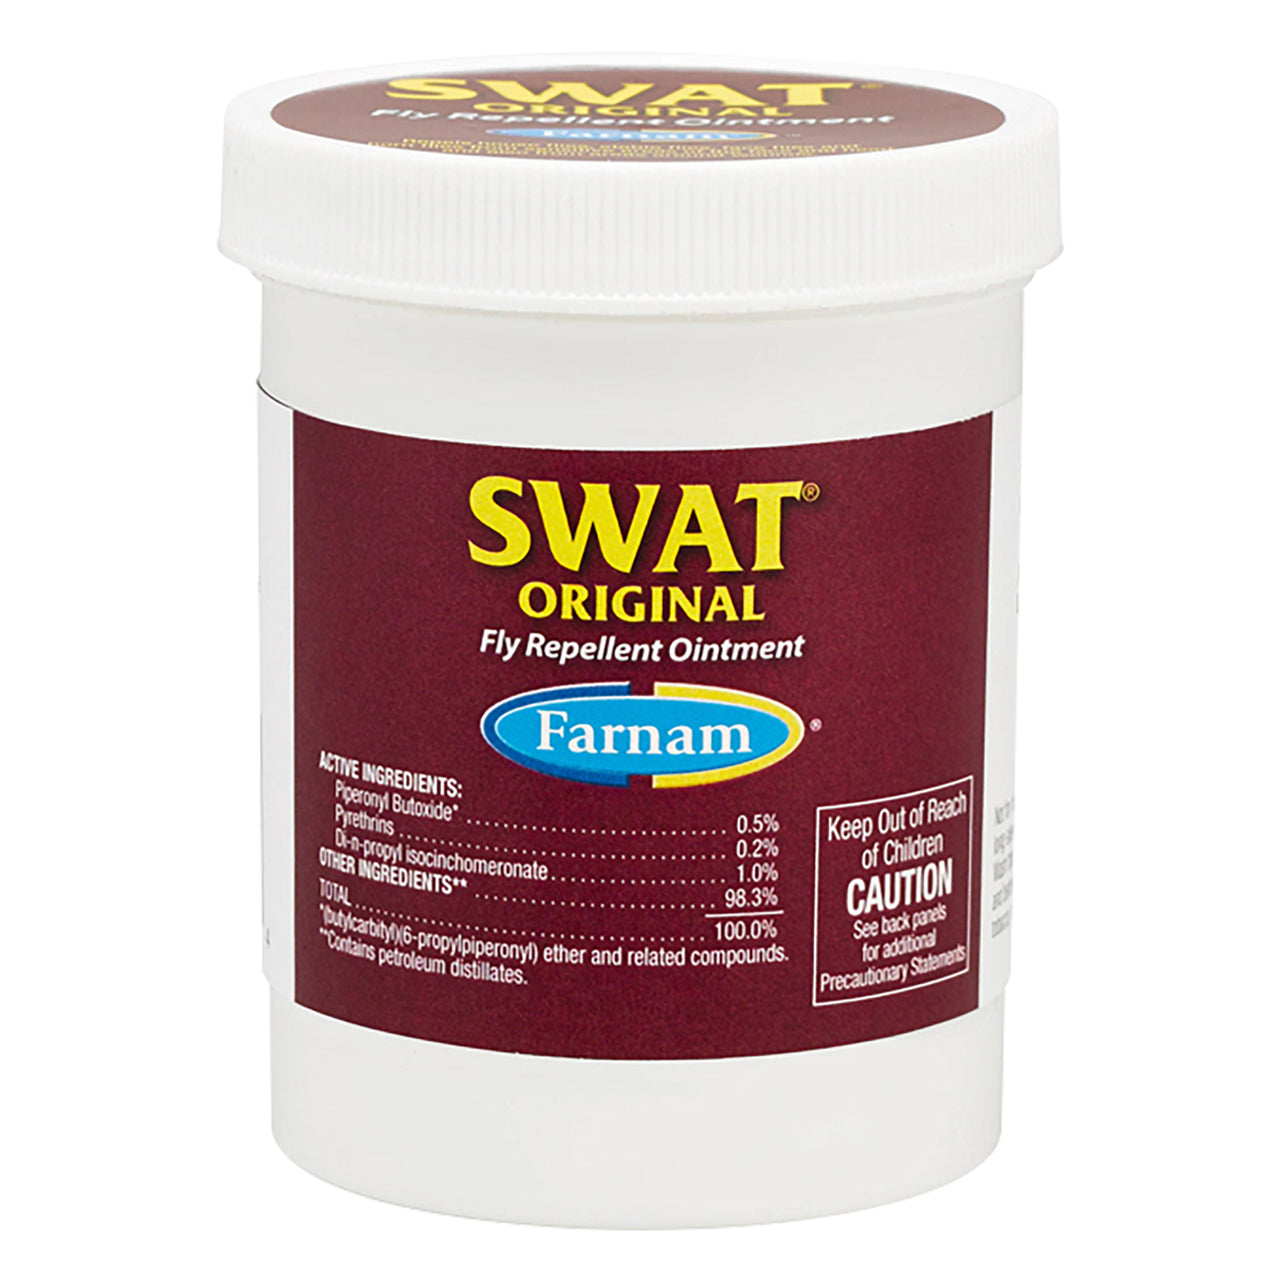 Farnam Swat Fly Repellent Ointment Pink - 198g